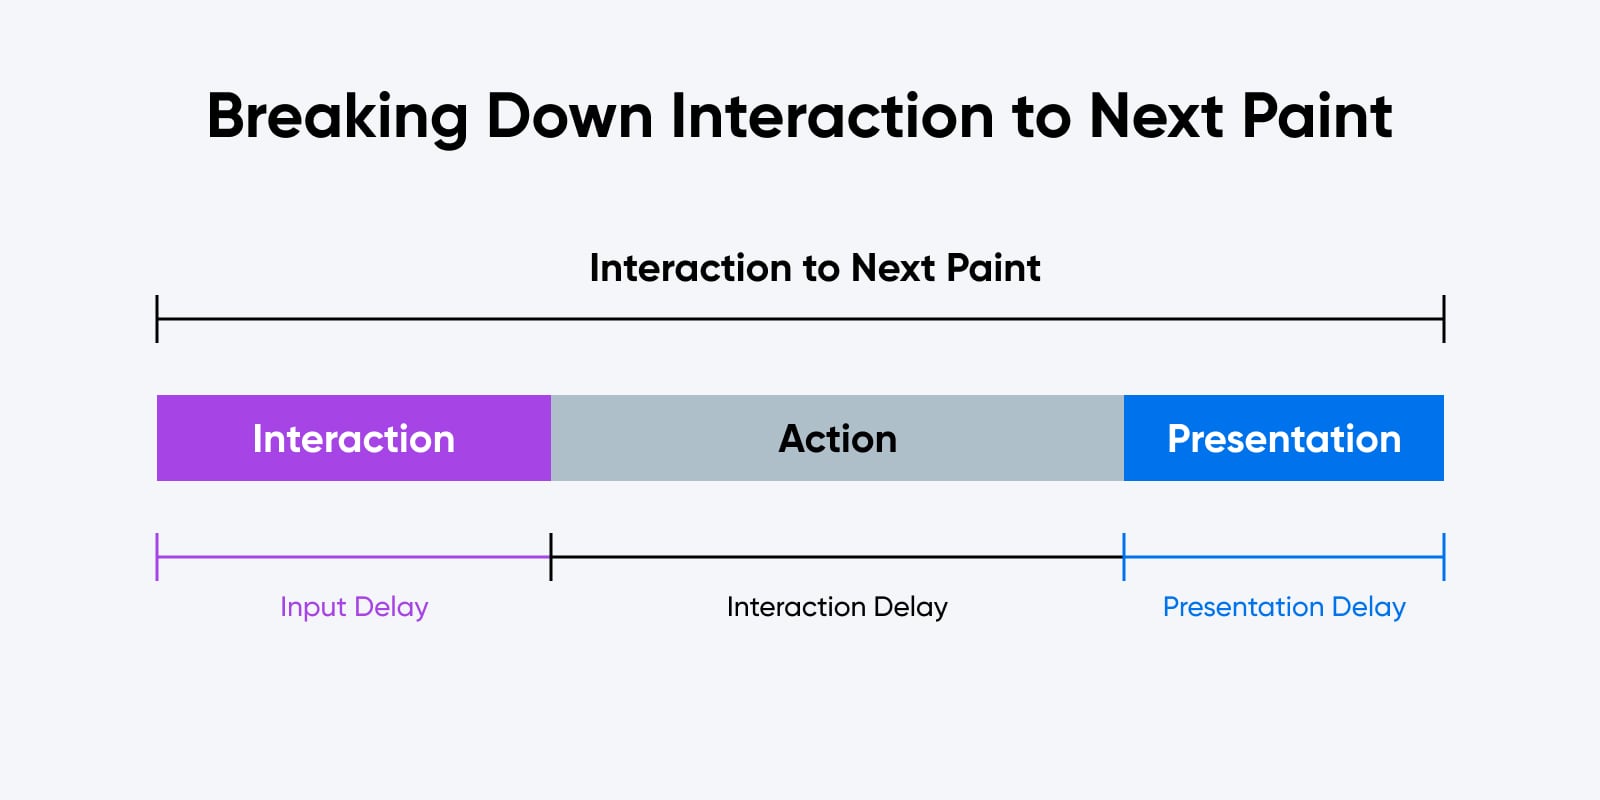 Breaking Down Interaction to Next Paint